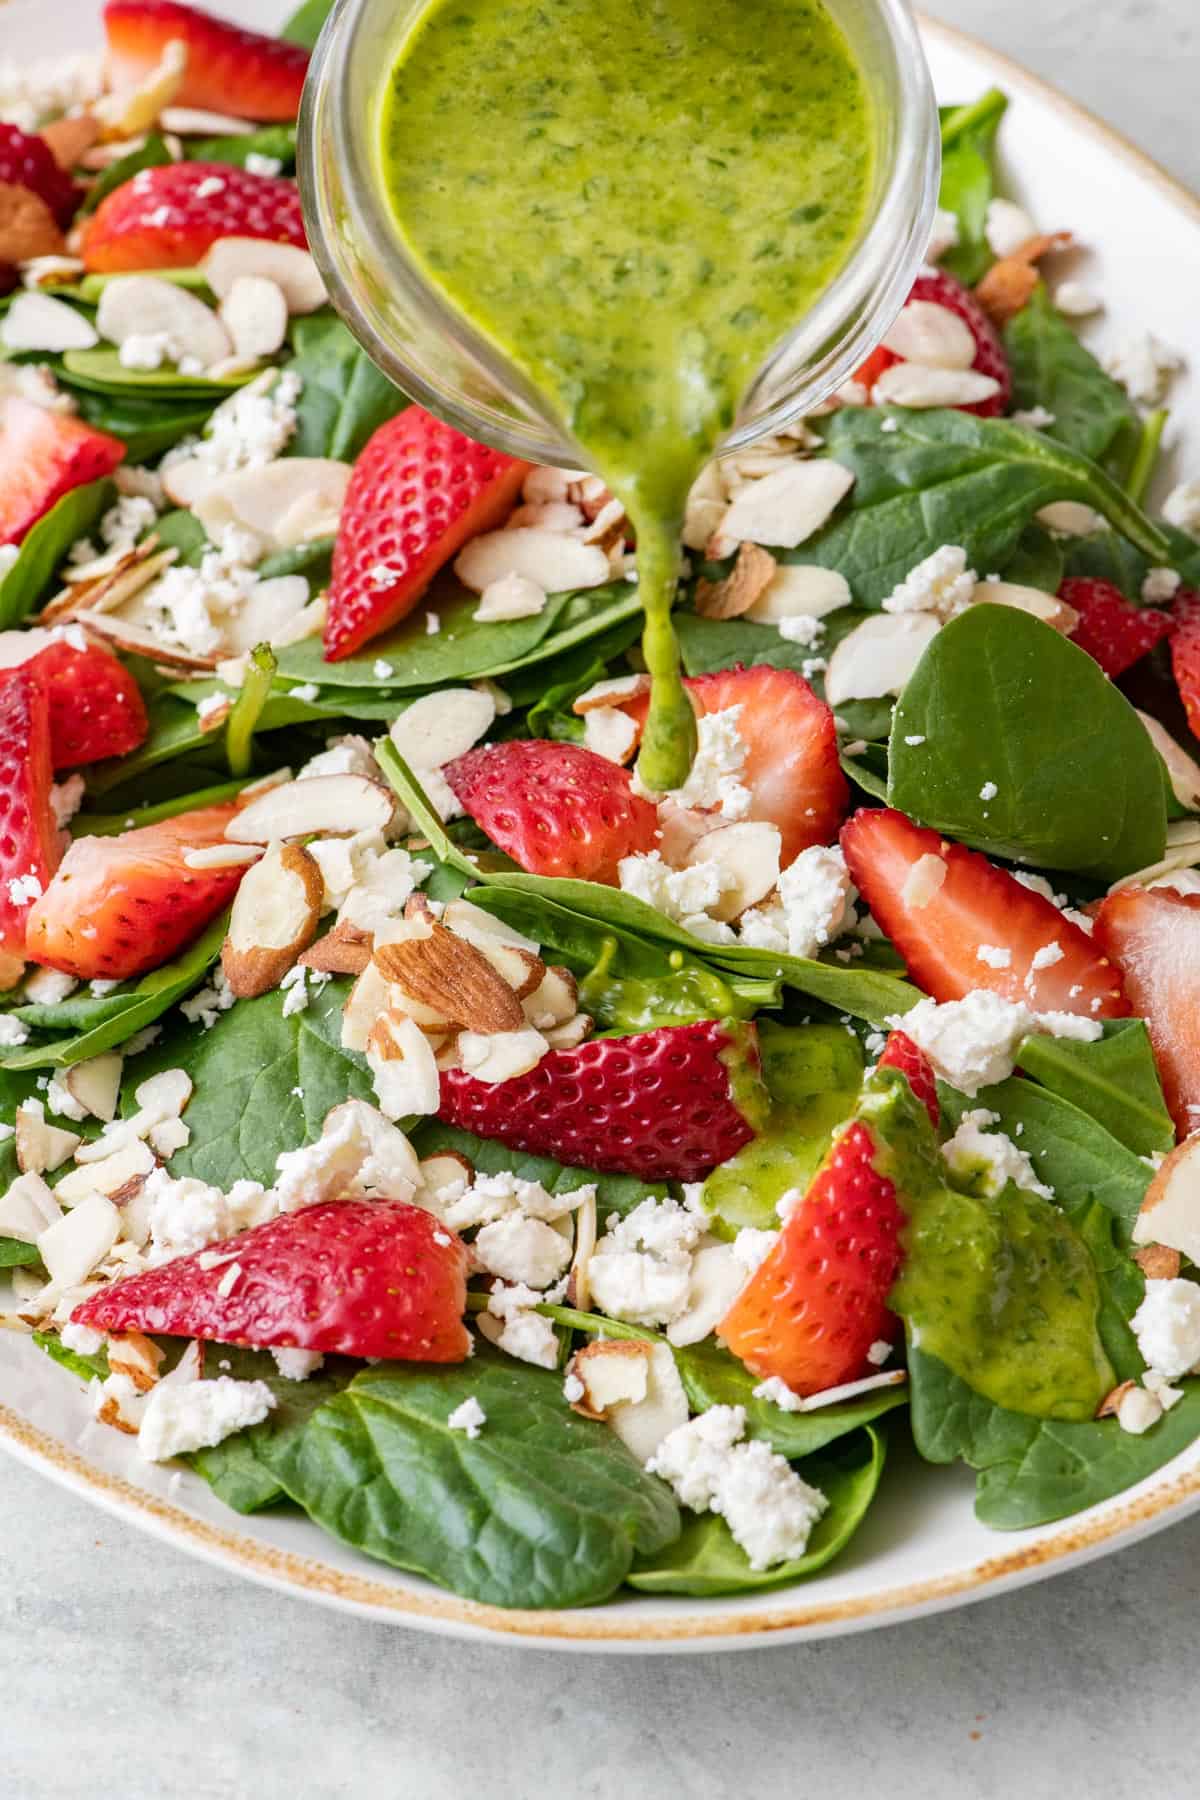 Basil vinaigrette being poured over a spinach salad with strawberries, feta, and almonds.